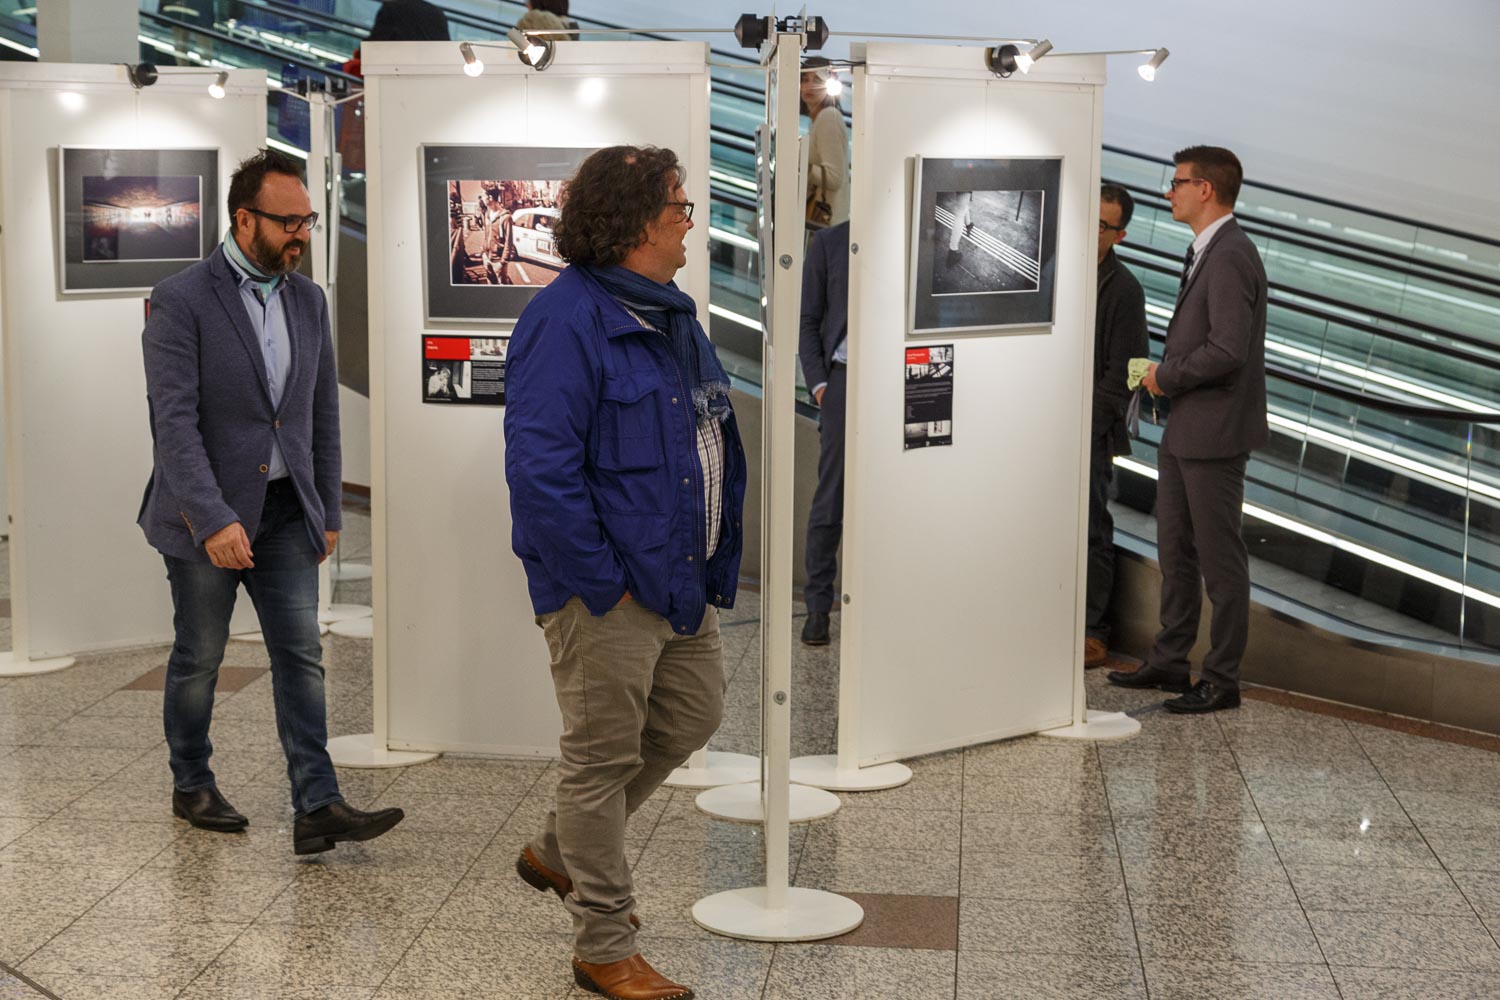 Collective exhibition by Street Photography Luxembourg at City Concorde in Bertrange